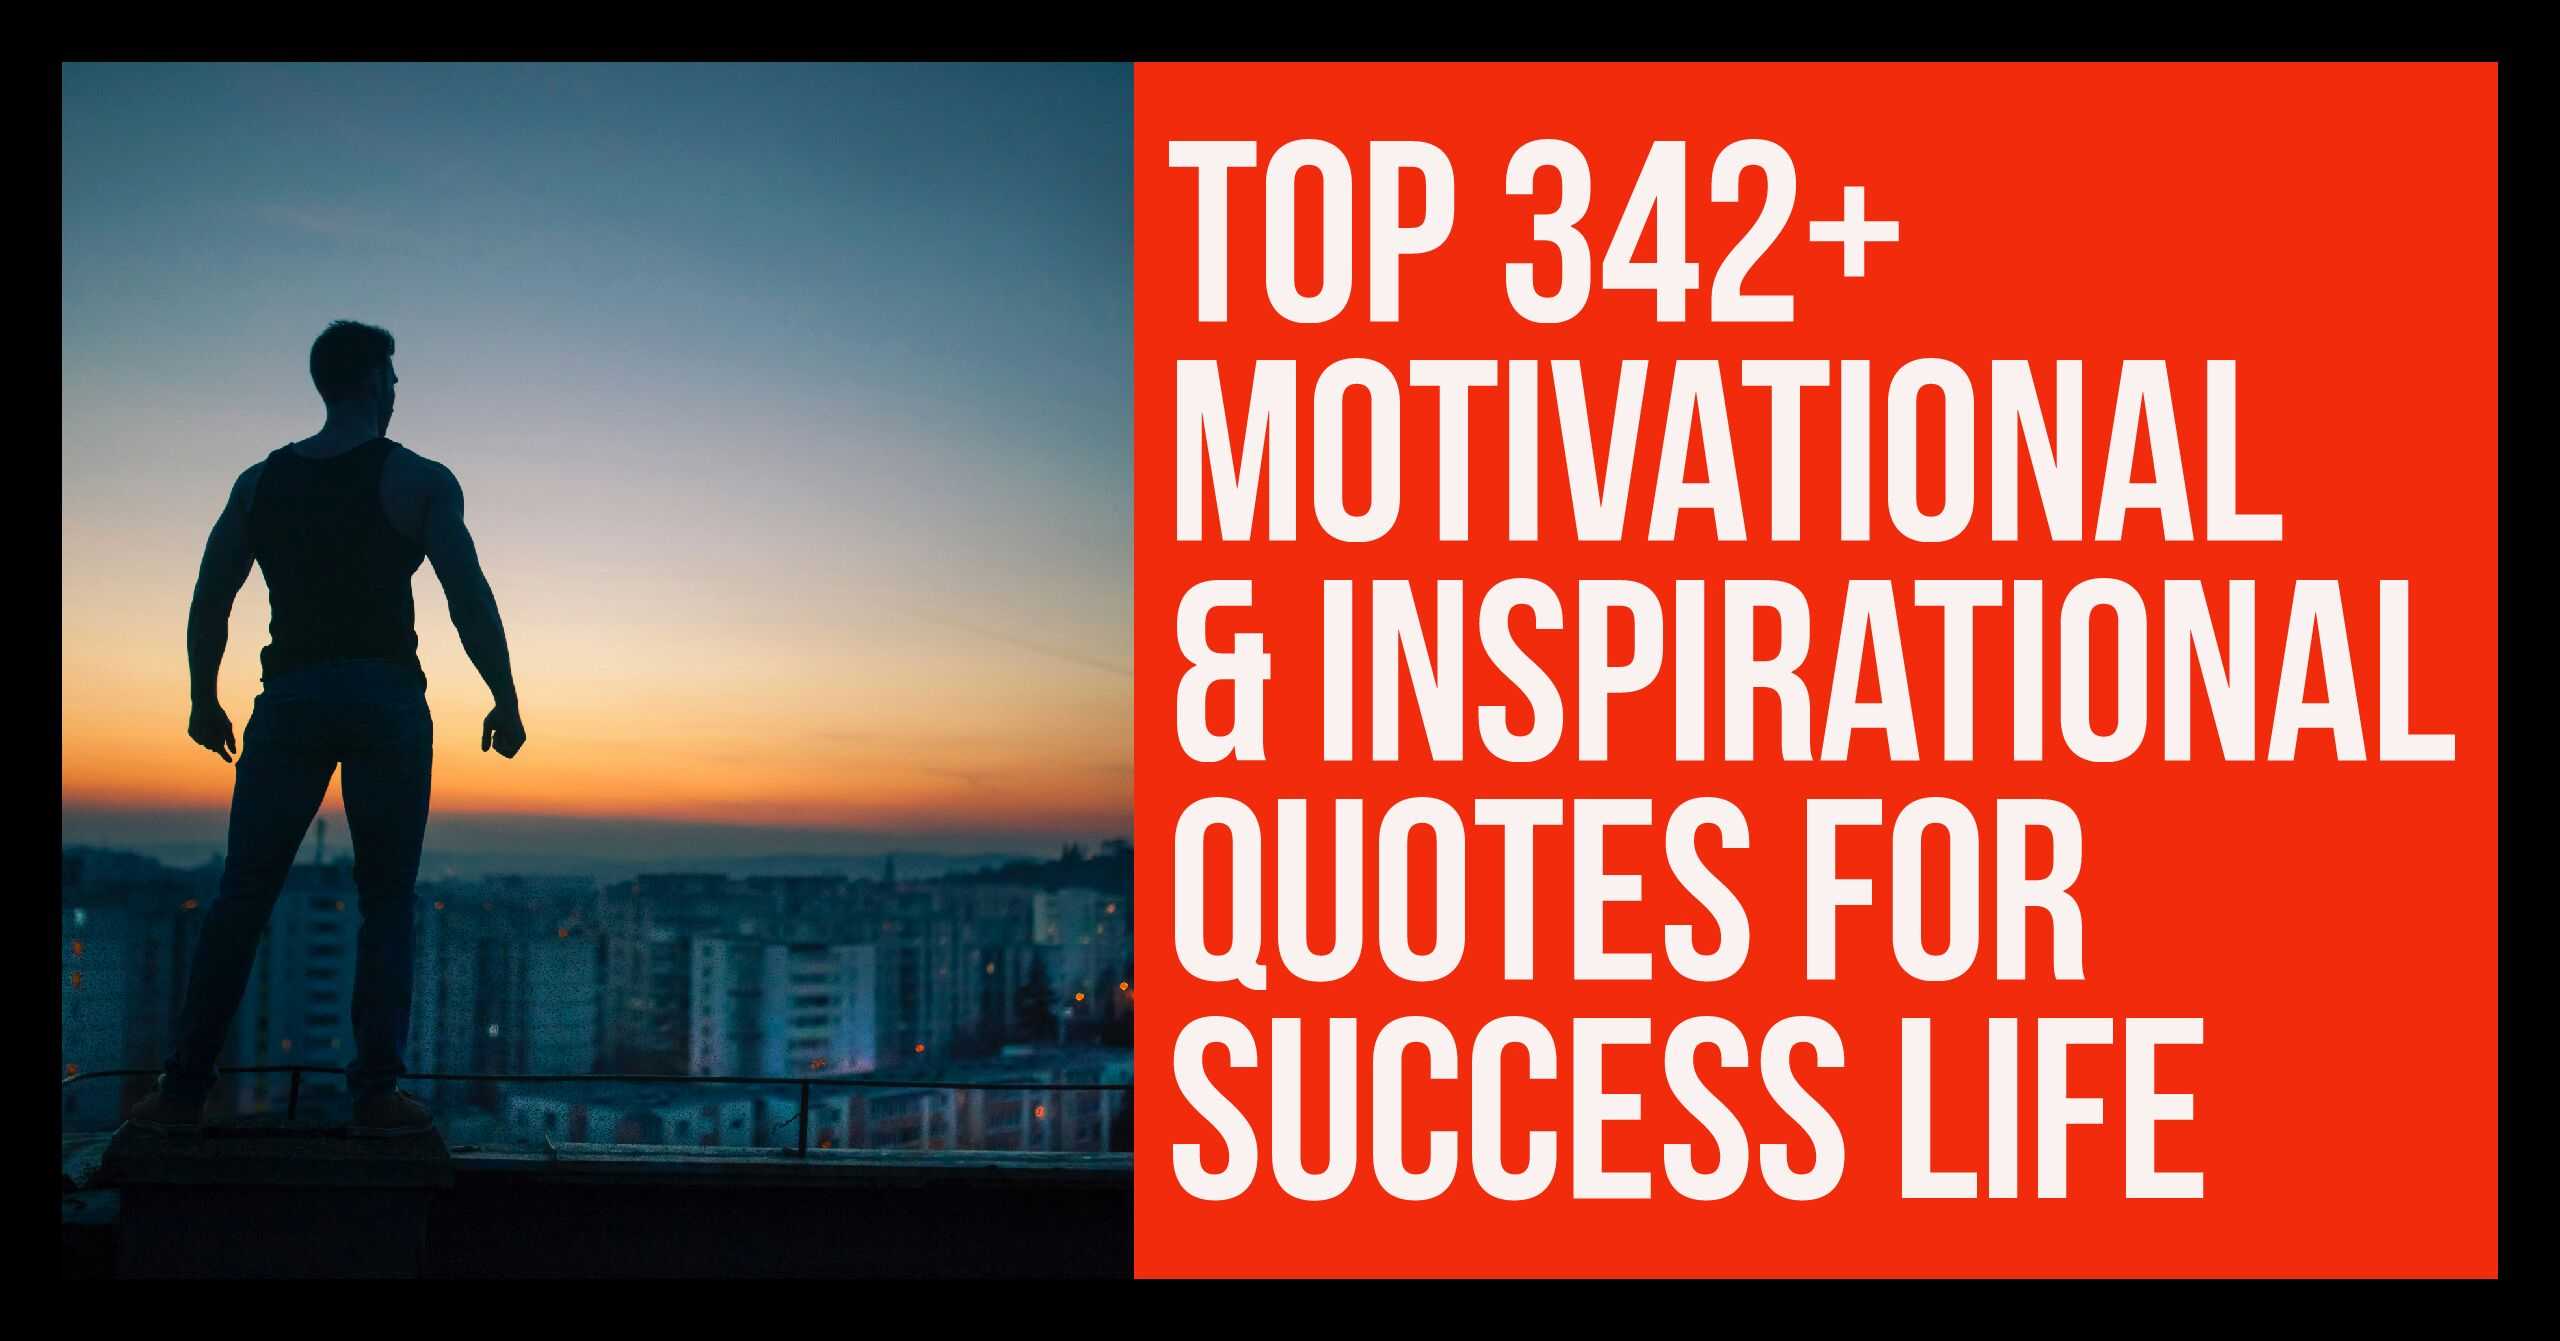 Motivational and Inspirational Quotes for success life